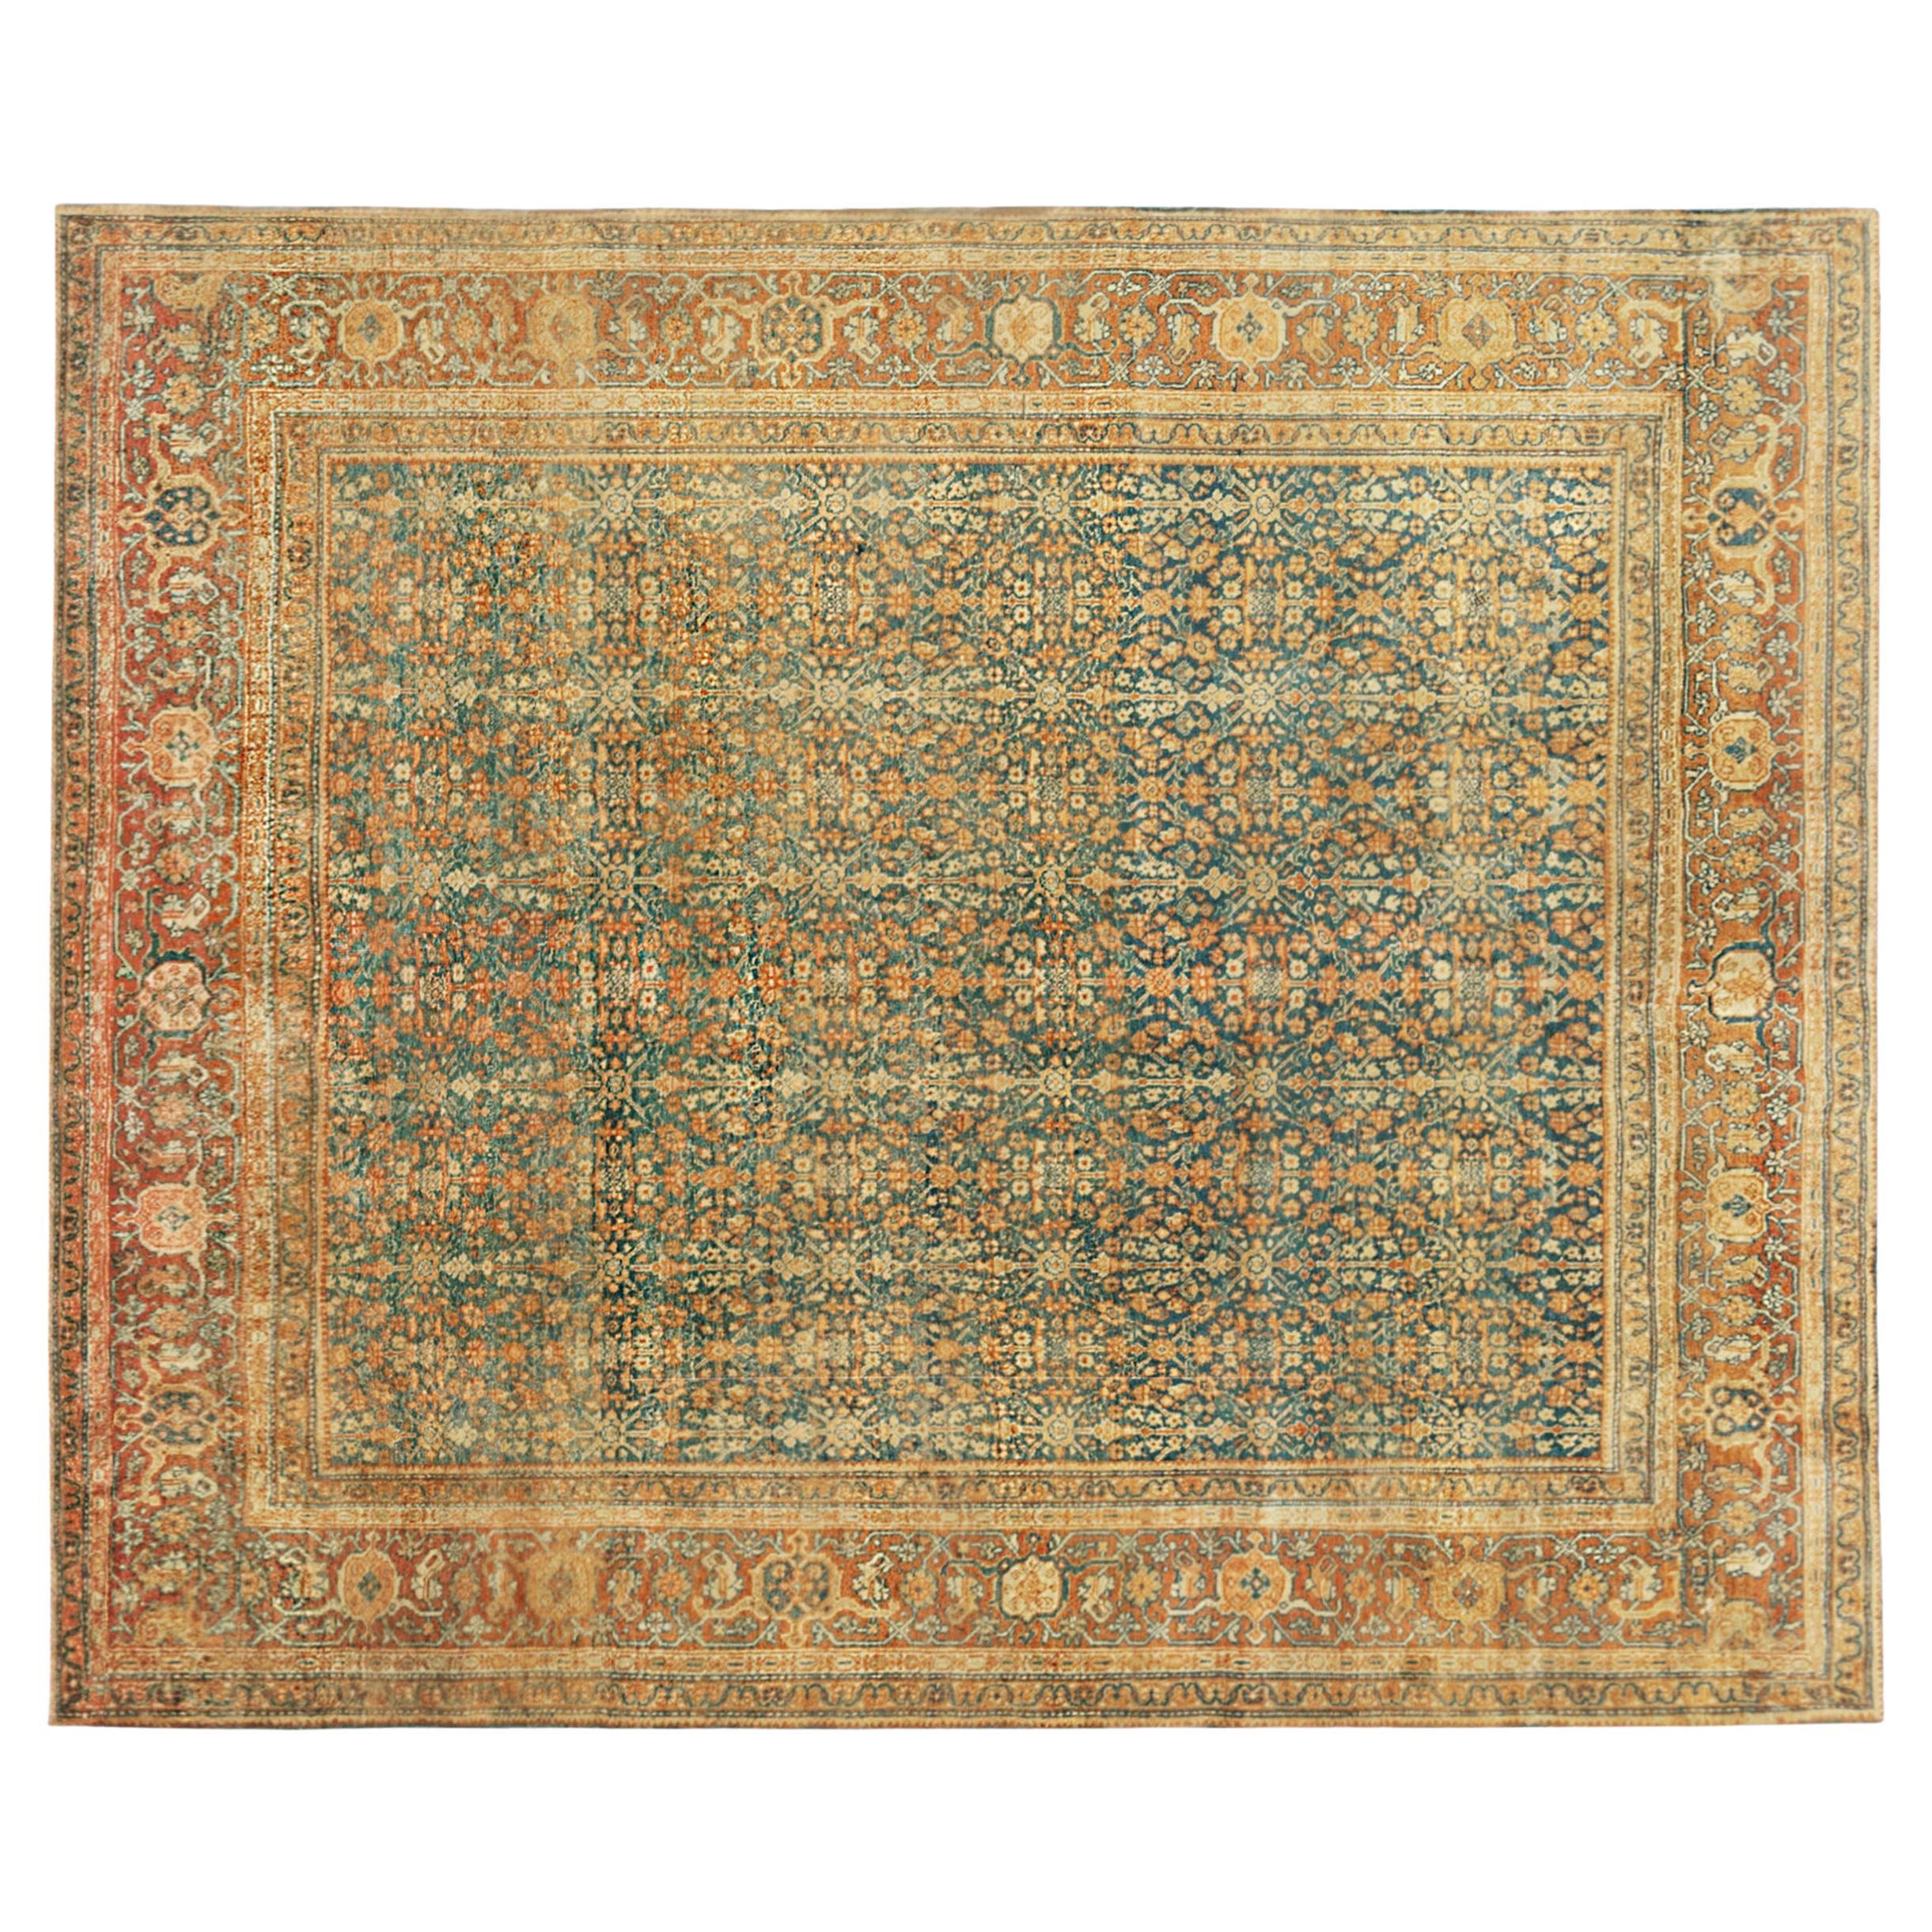 Antique Persian Tabriz Oriental Carpet in Room Size with Repeating Design